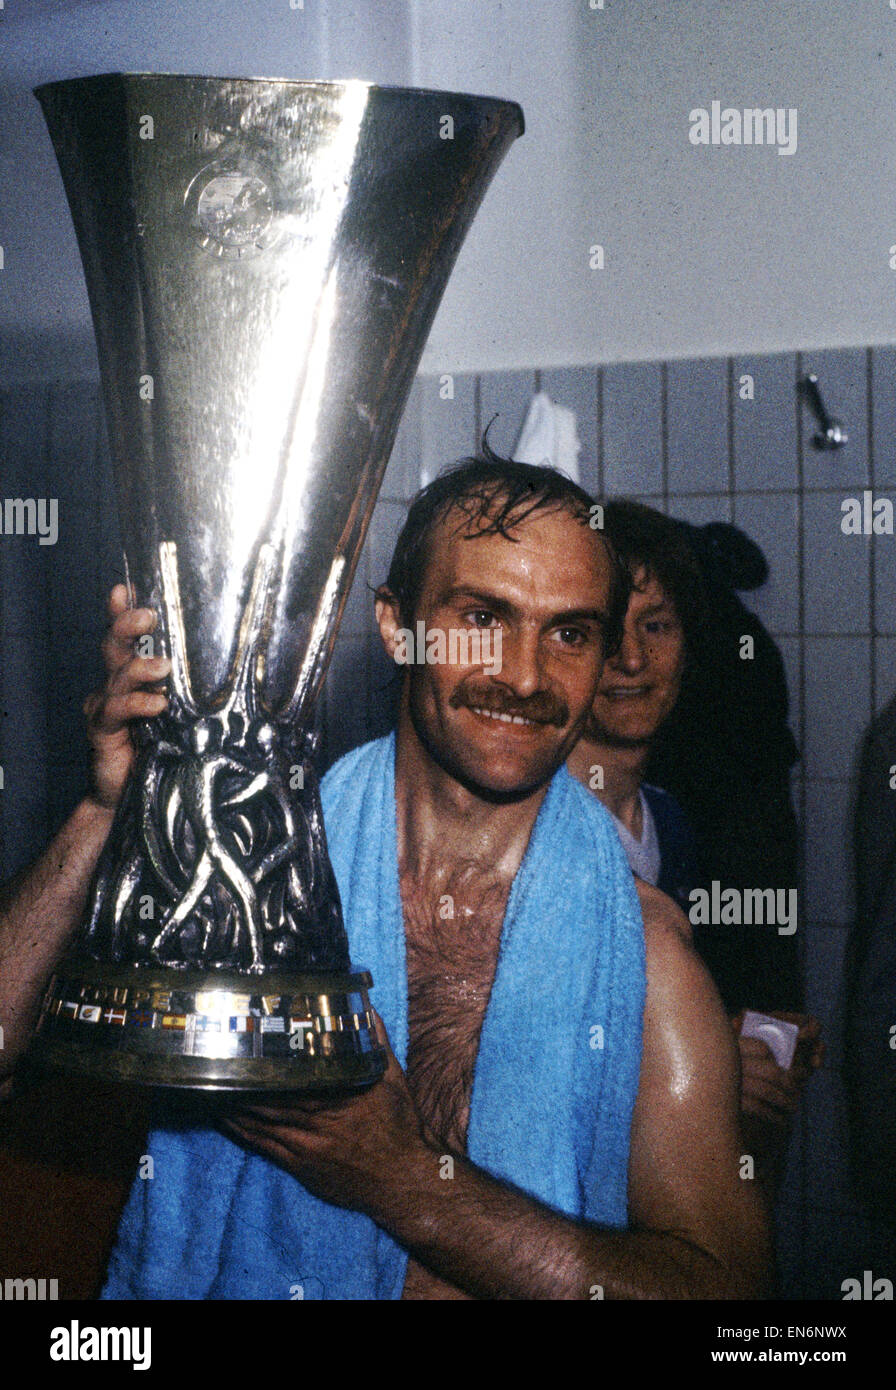 Ipswich Town captain Mick Mills holds aloft the UEFA Cup trophy after his side defeated AZ Alkmaar in Amsterdam to win the Final over two legs. 20th May 1981. Stock Photo